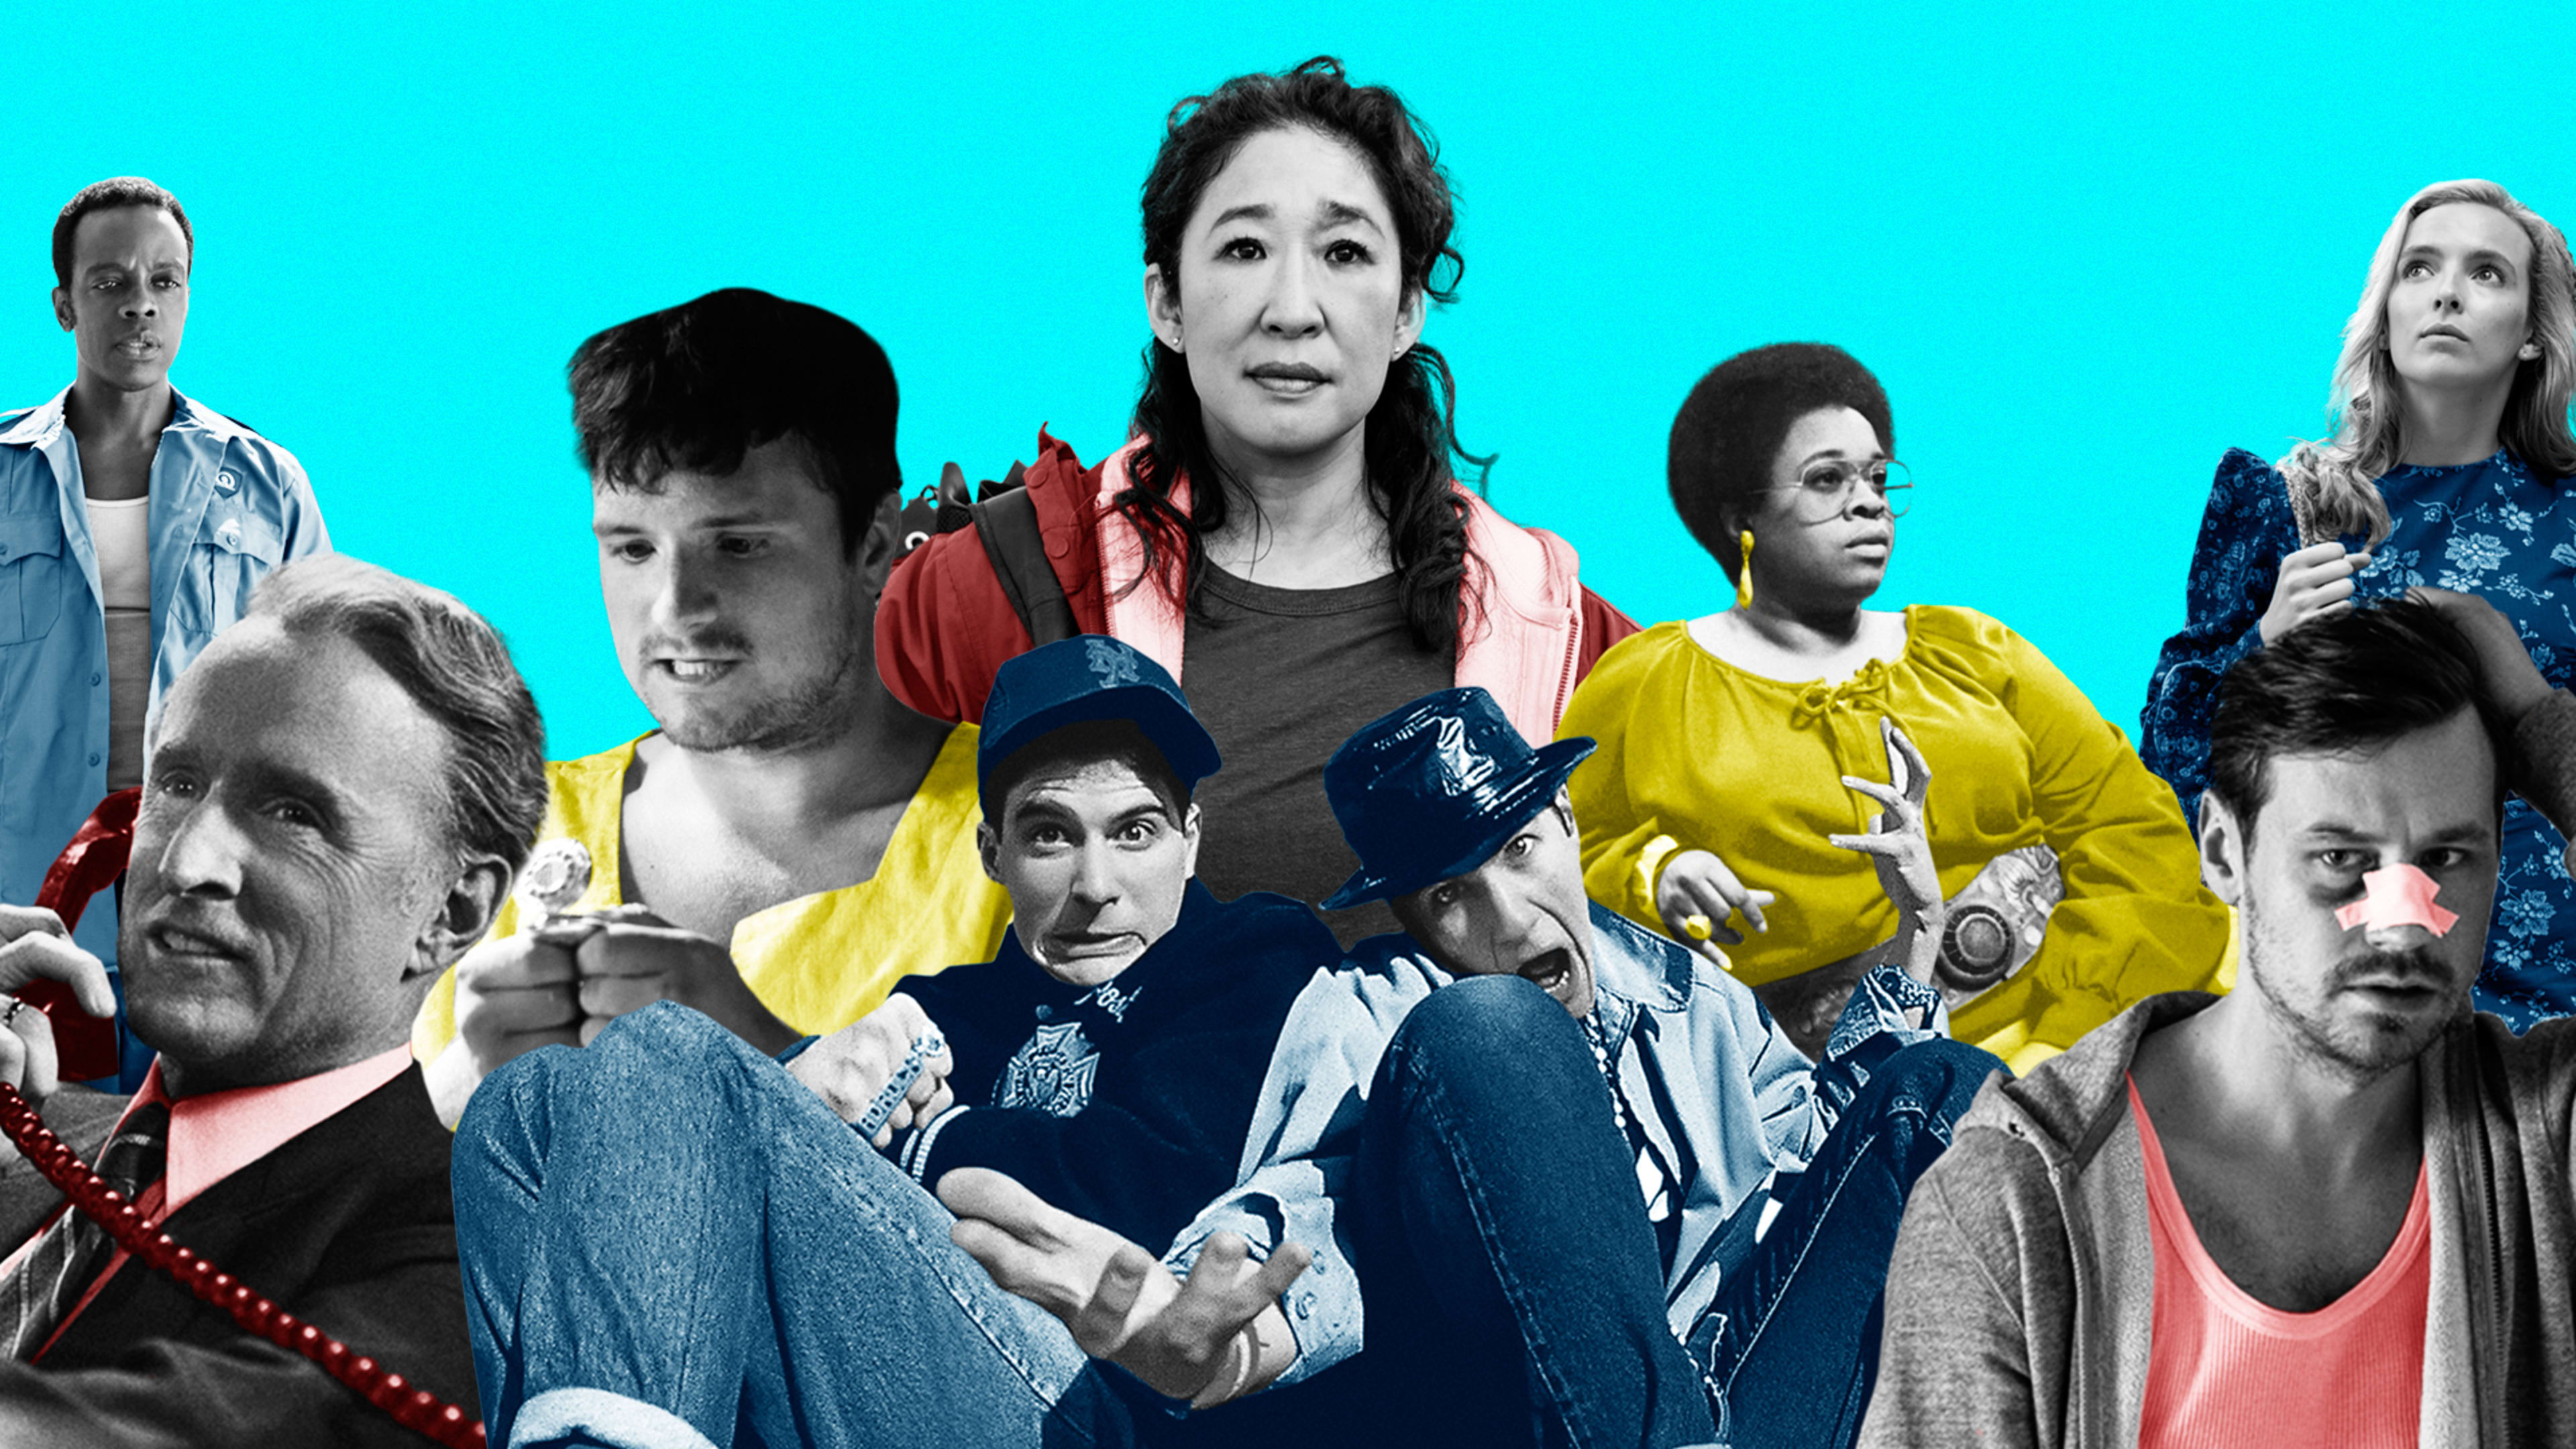 Beastie Boys and Issa Rae headline 88 pop-culture musts to get you through April’s quarantine